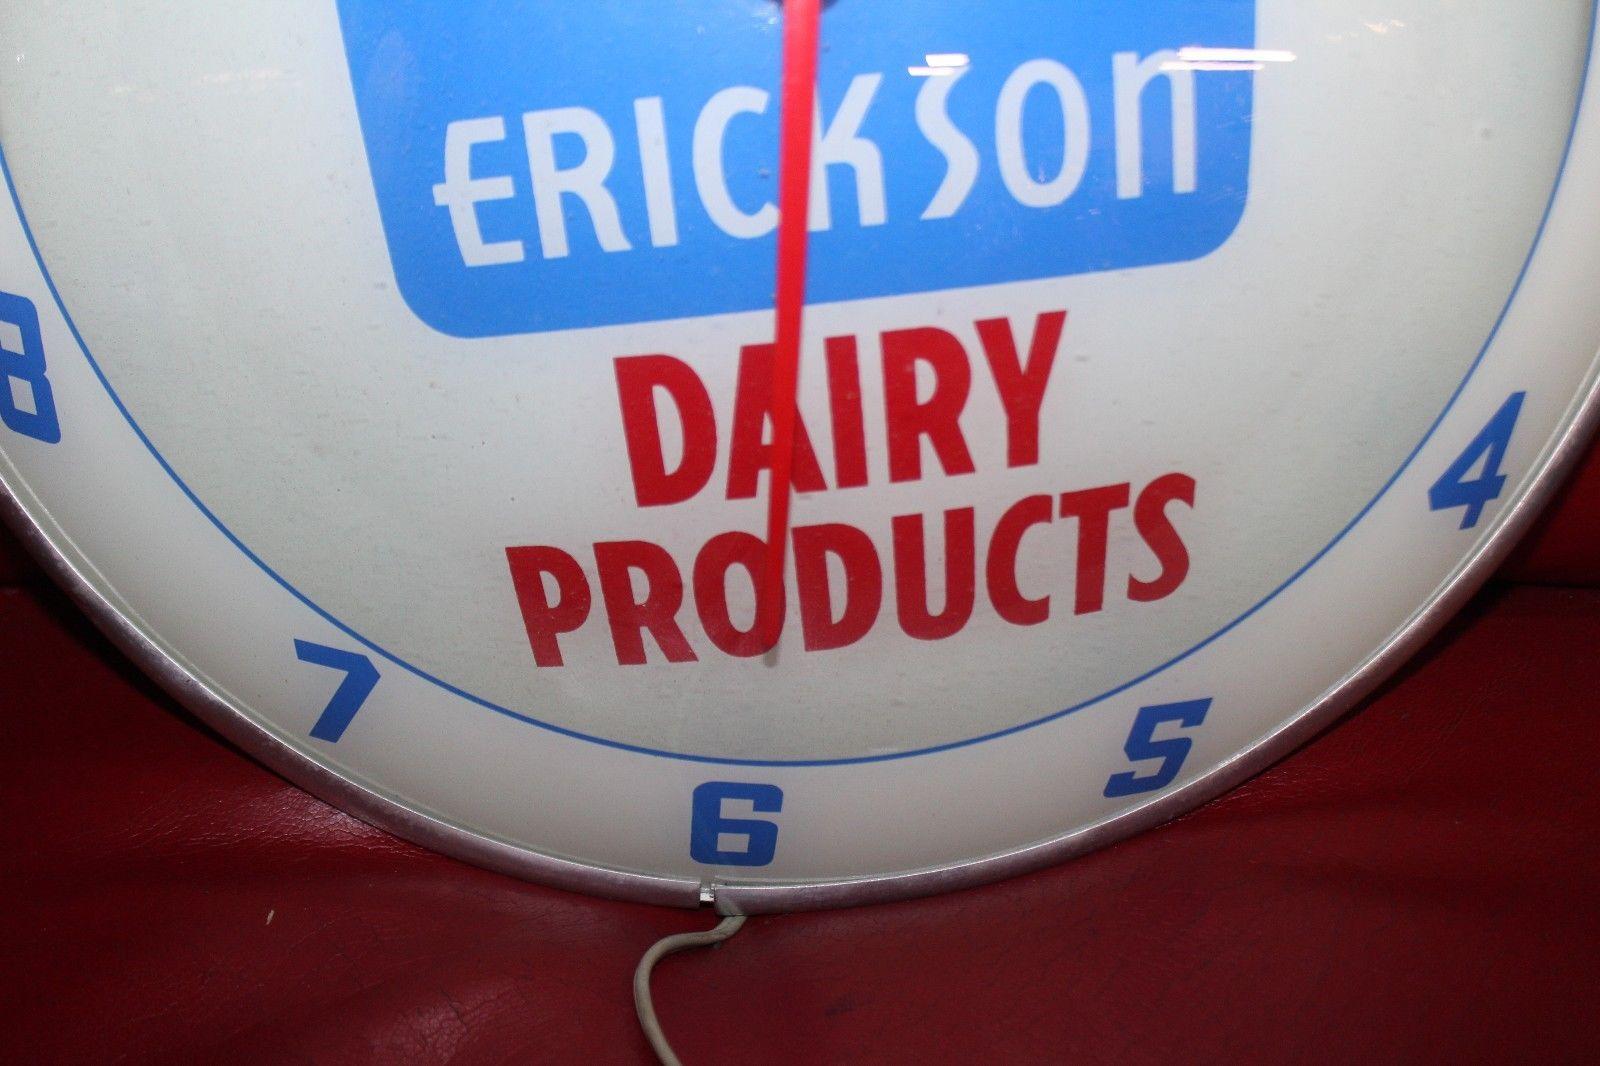 1950s Anderson Erickson Dairy Advertising Double Bubble Clock In Good Condition For Sale In Orange, CA